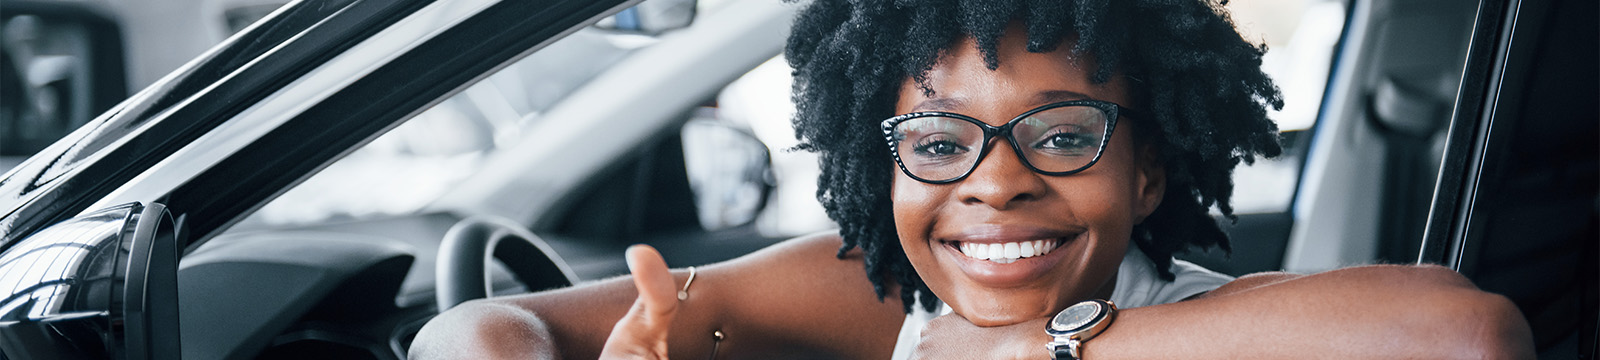 Smiling girl with cool glasses in new car